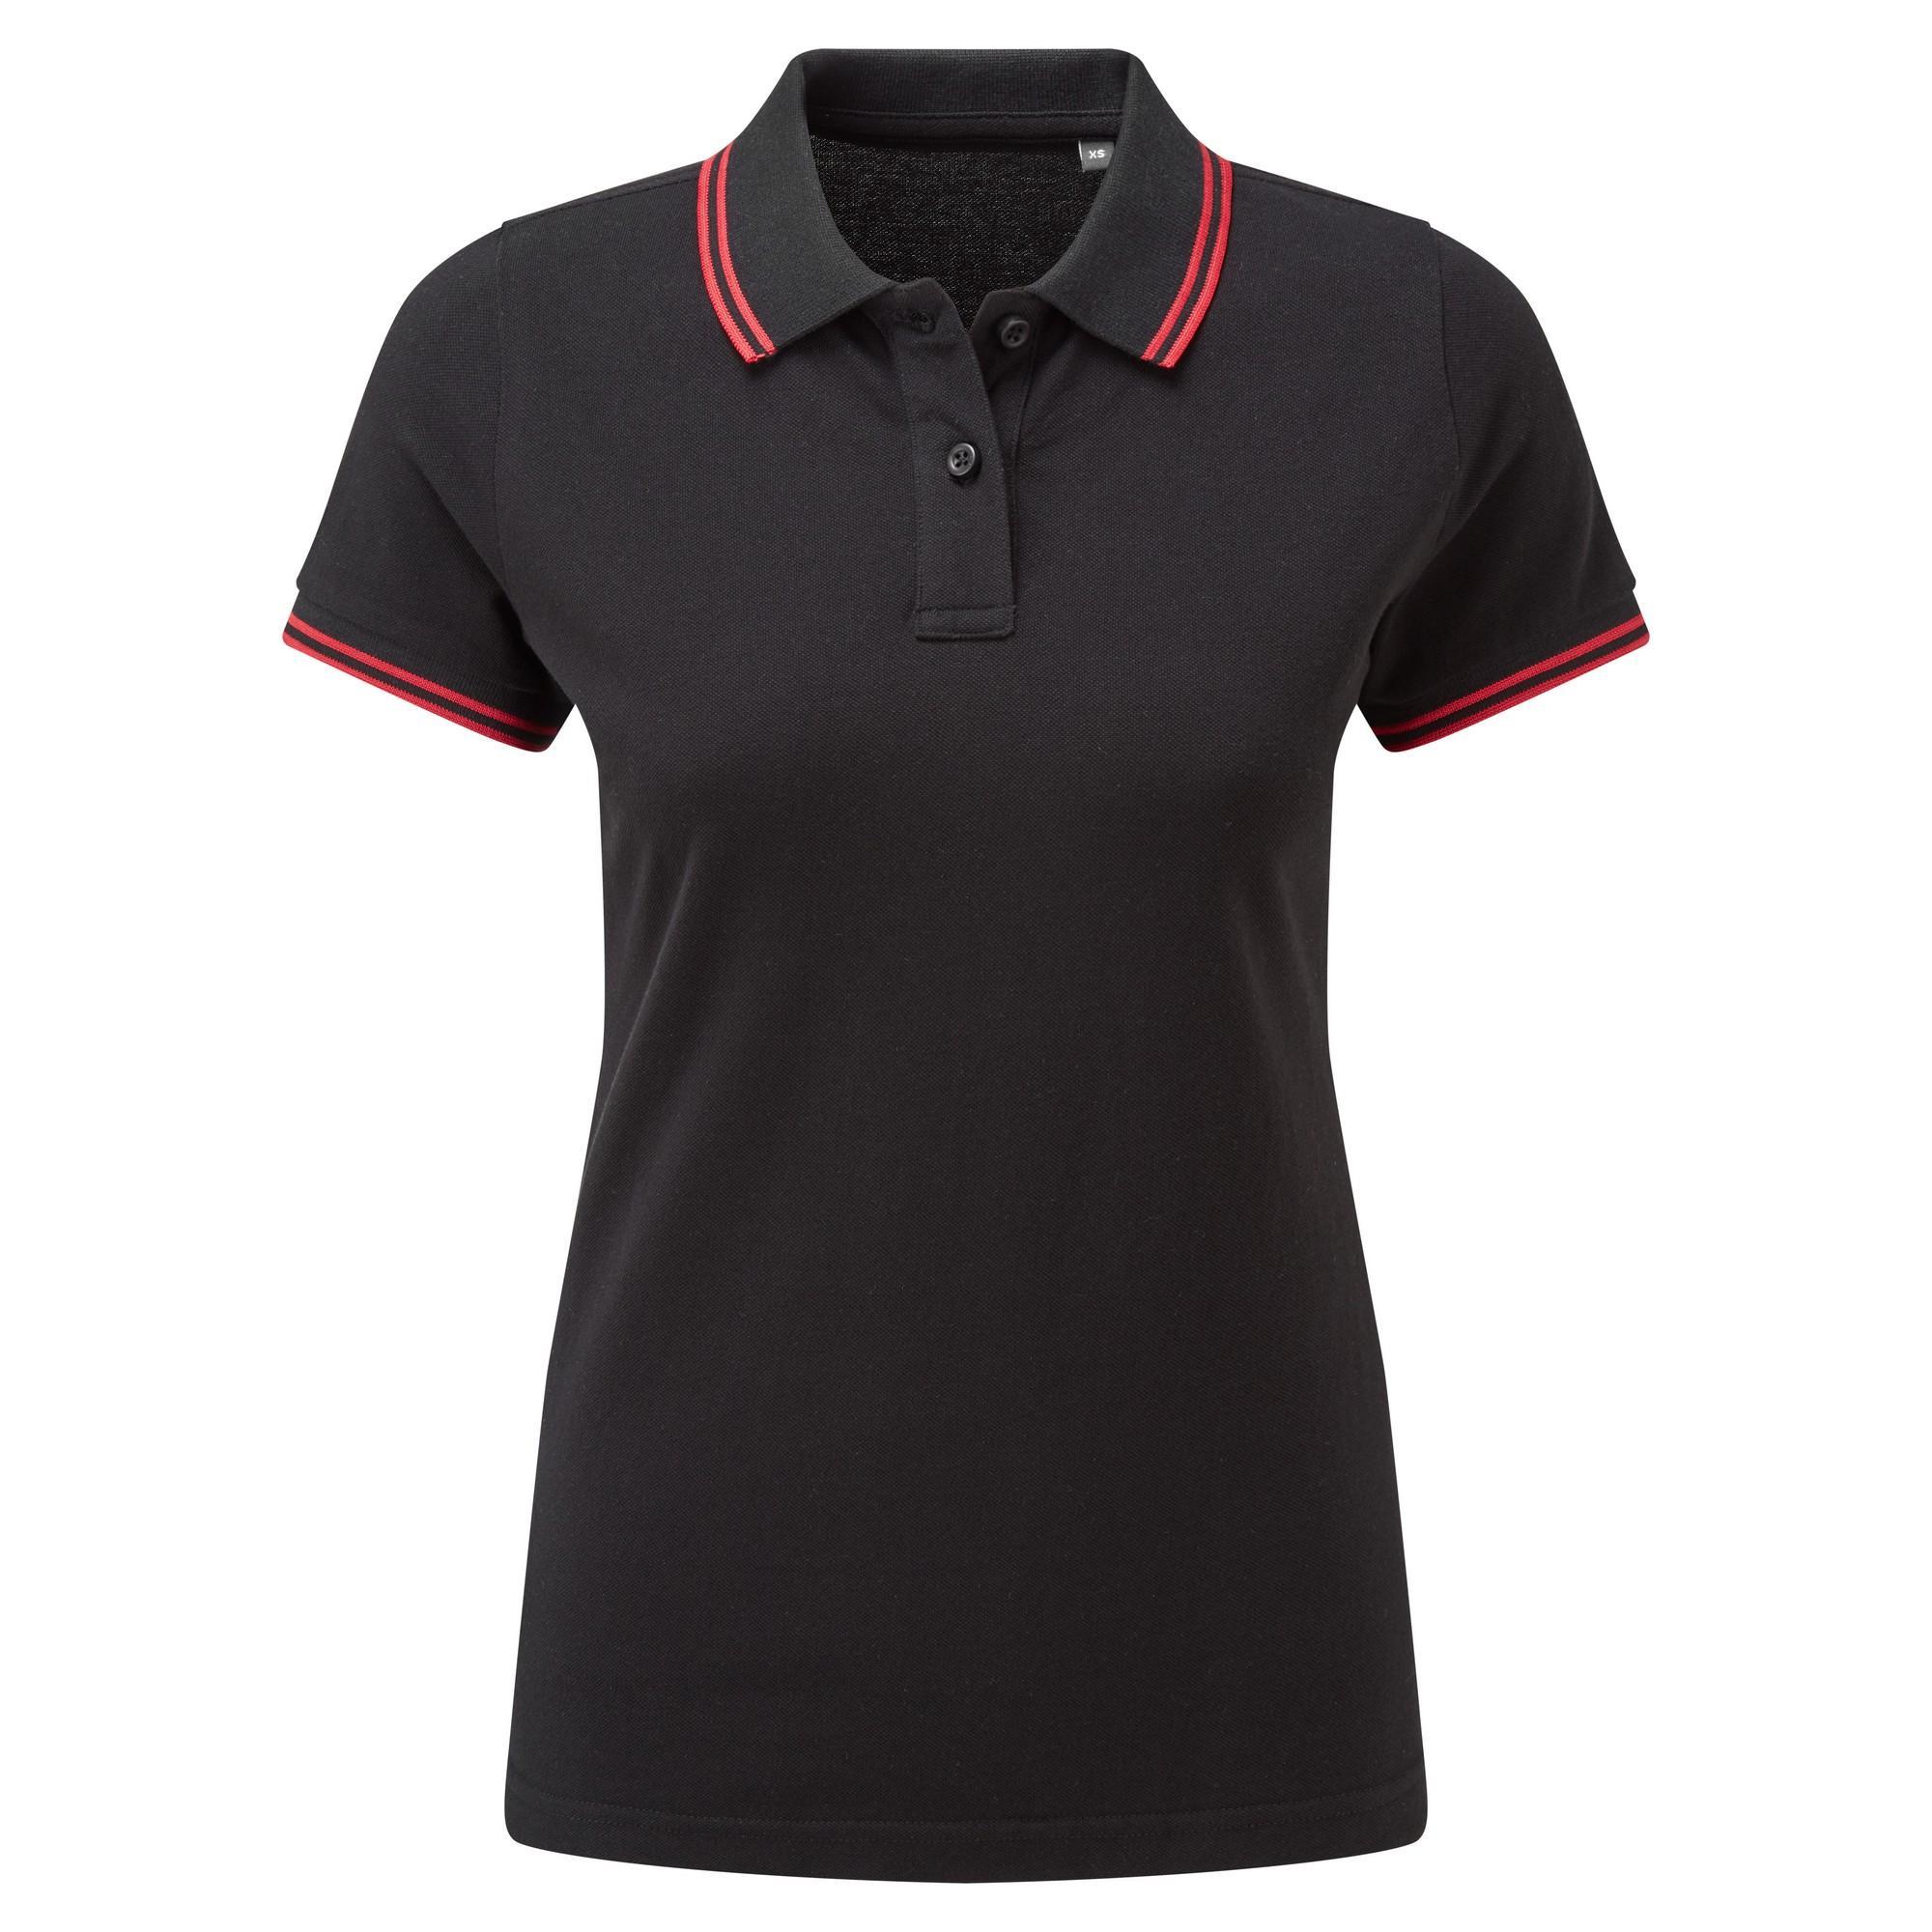 Asquith & Fox Womens/Ladies Classic Fit Tipped Polo (Black/Red) (XS)